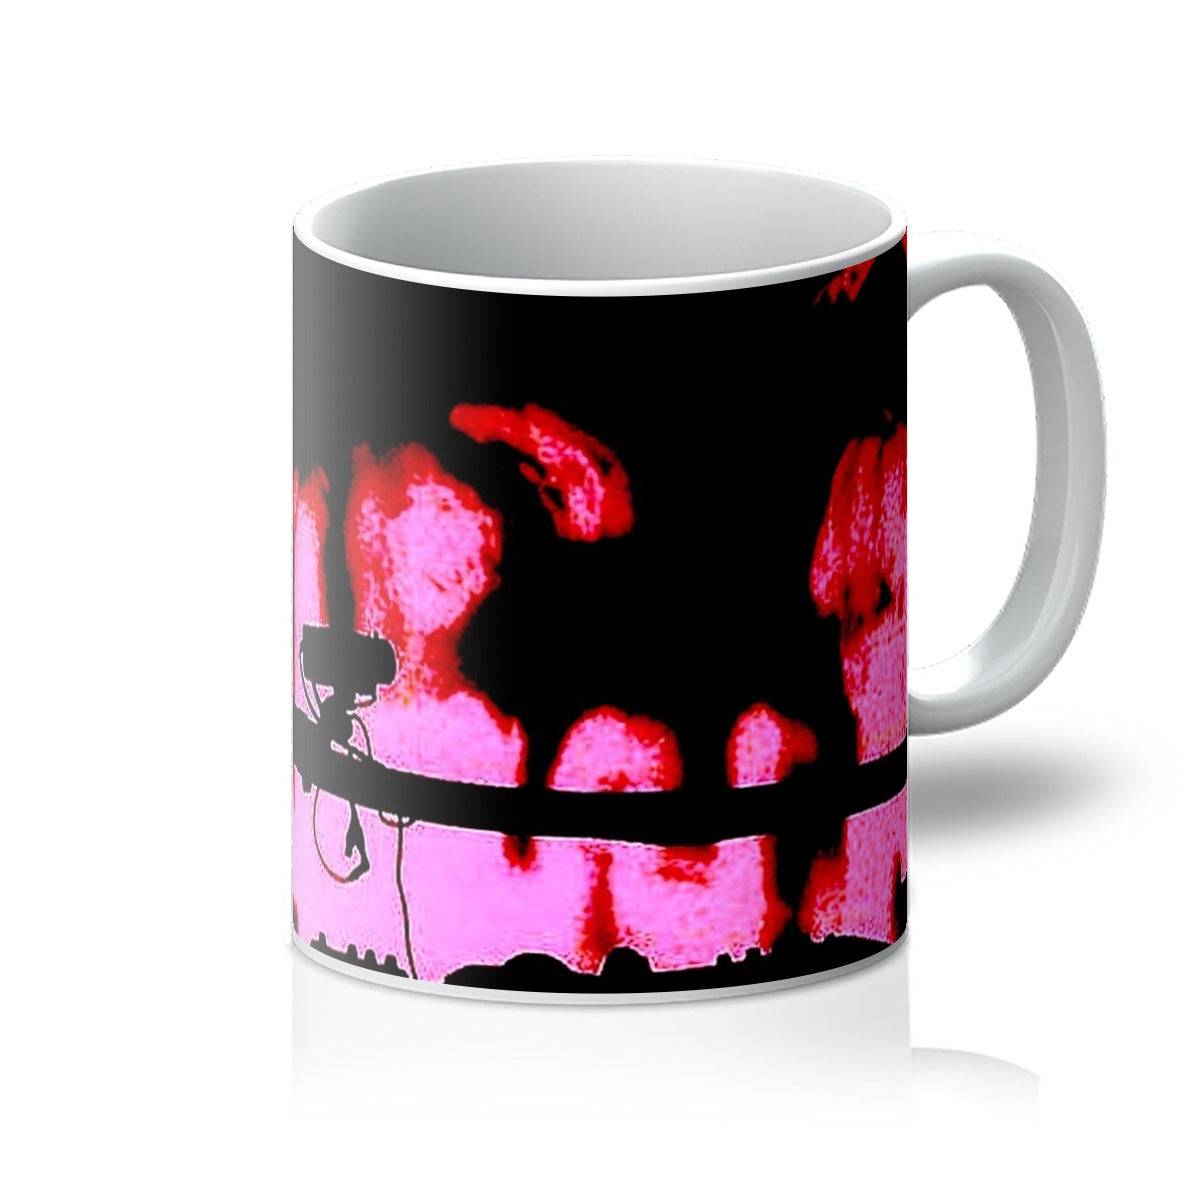 Dancing With The Devils Art Gifts Mug-Mugs-Abstract & Impressionistic Art Gallery-11oz-White-Paintings, Prints, Homeware, Art Gifts From Scotland By Scottish Artist Kevin Hunter